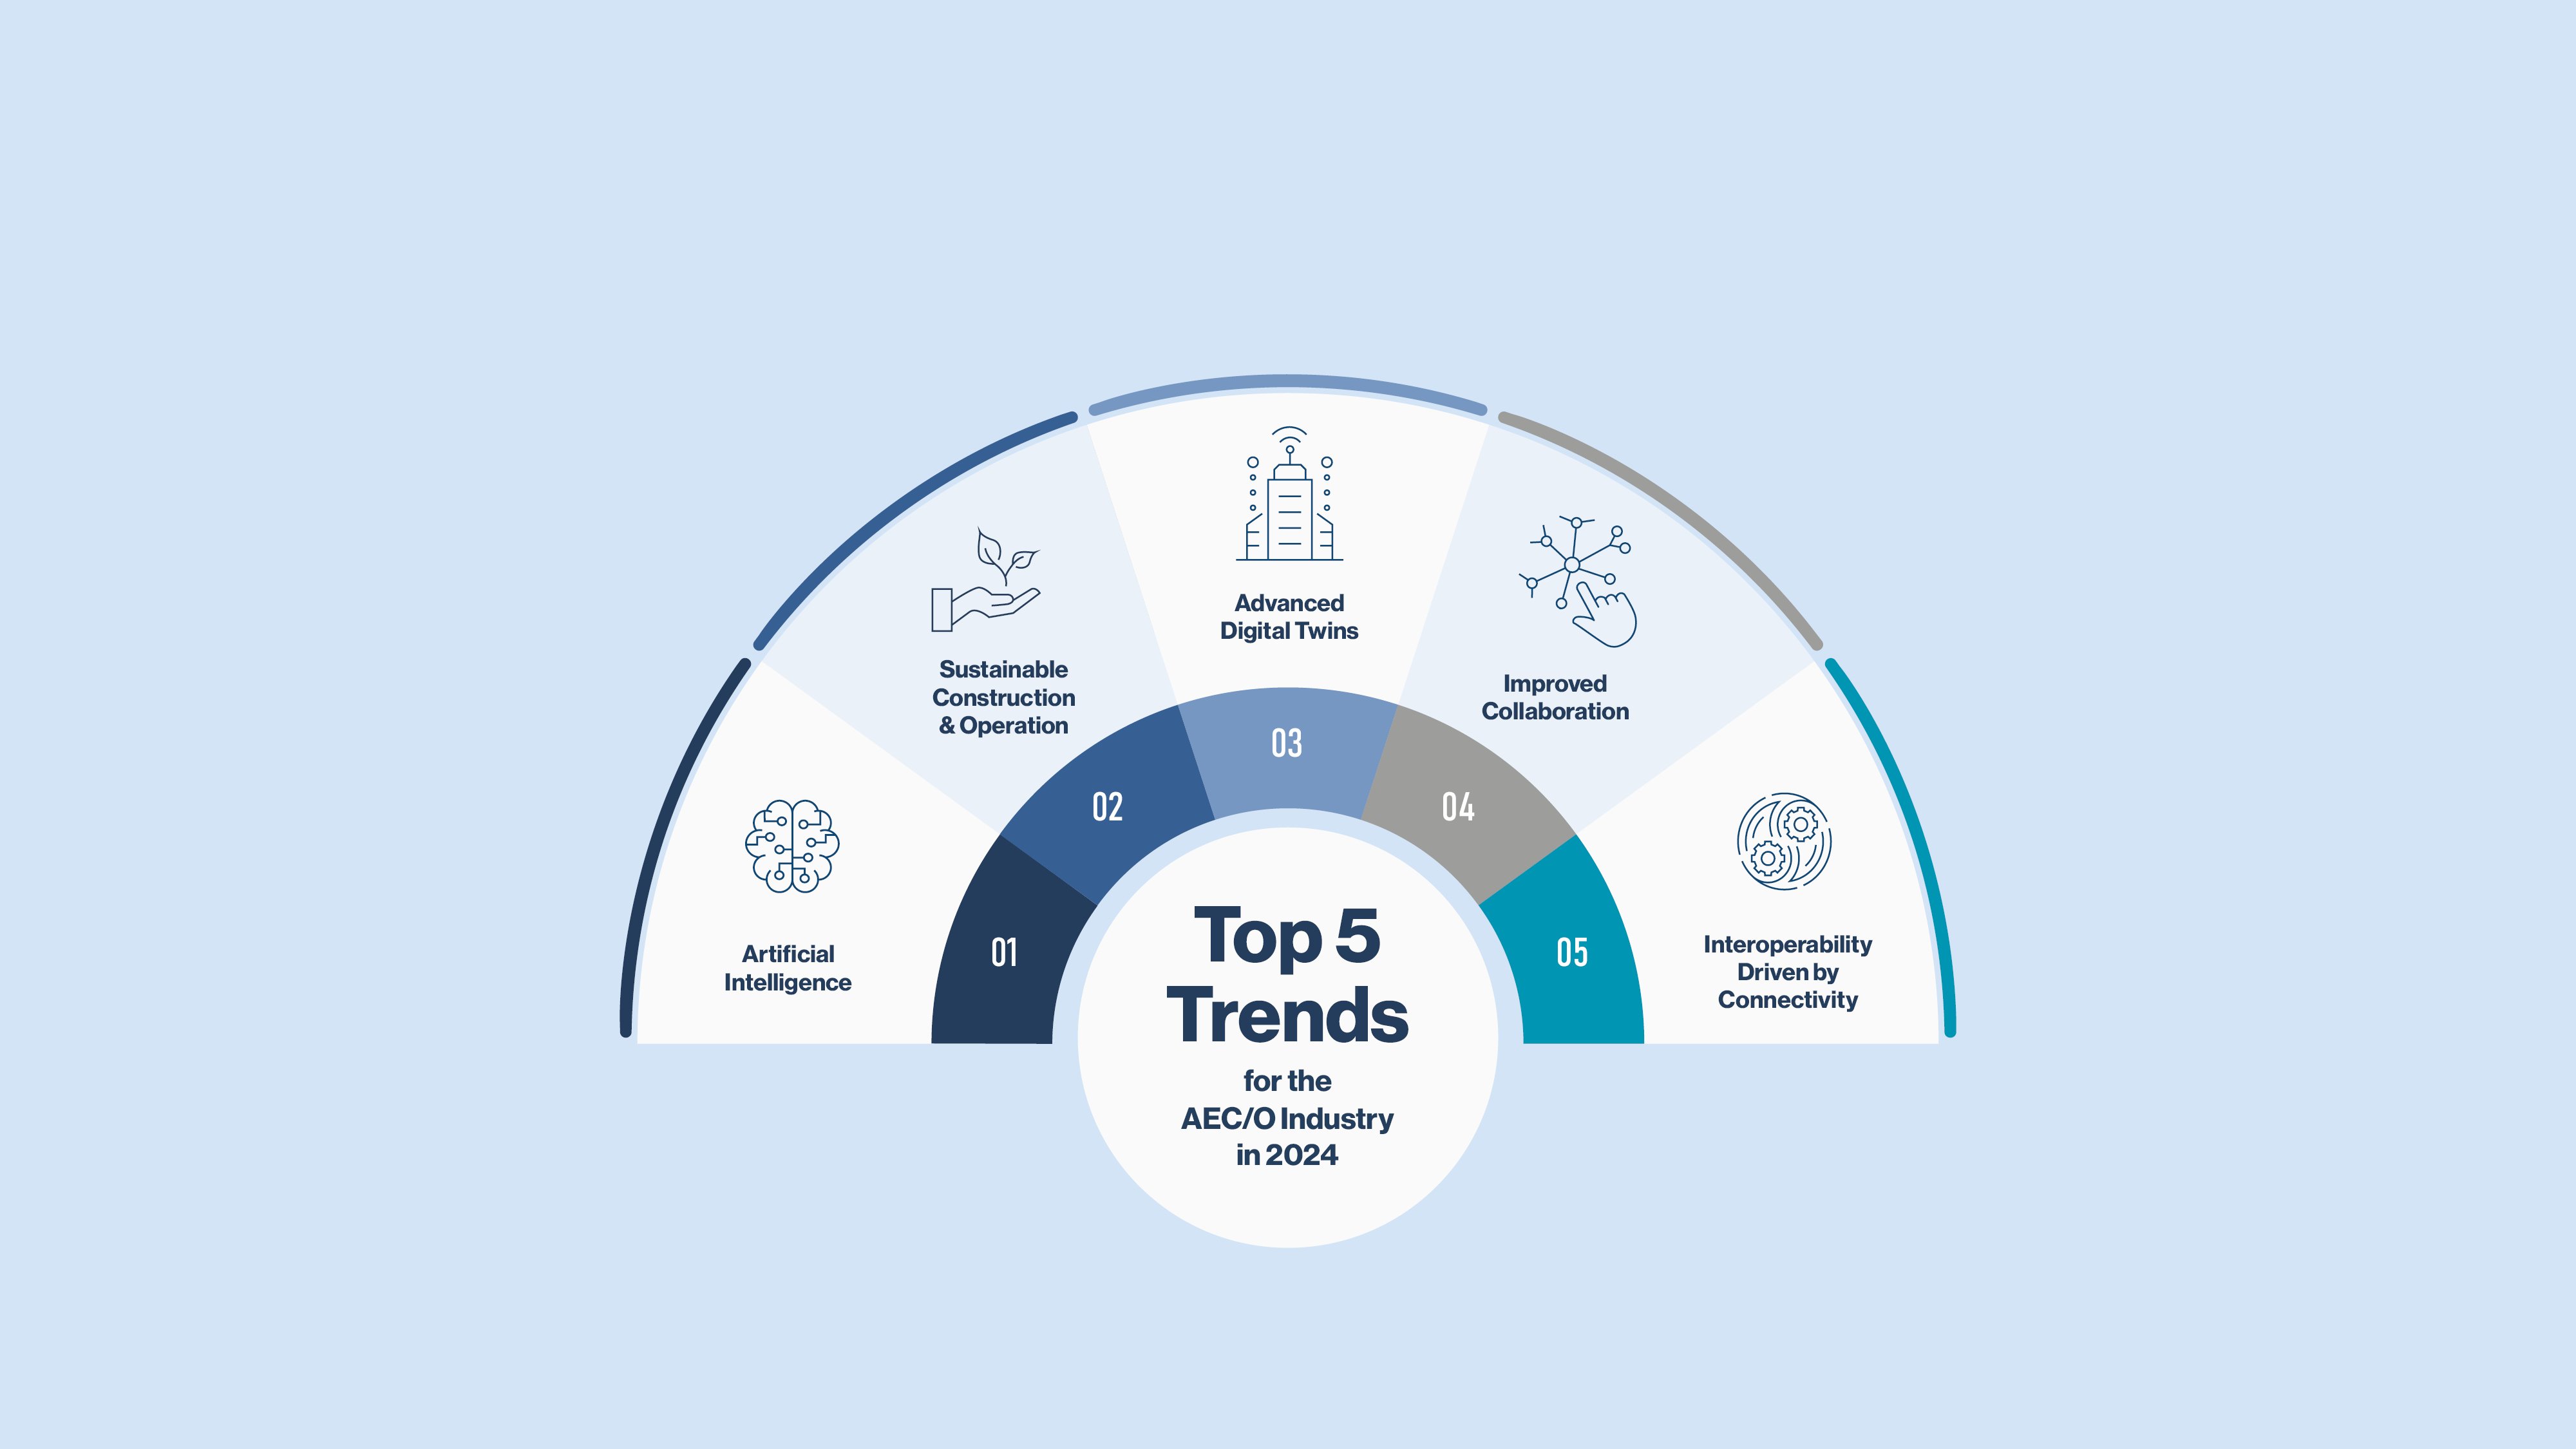 The Top 5 Trends for the AEC/O Industry in 2024